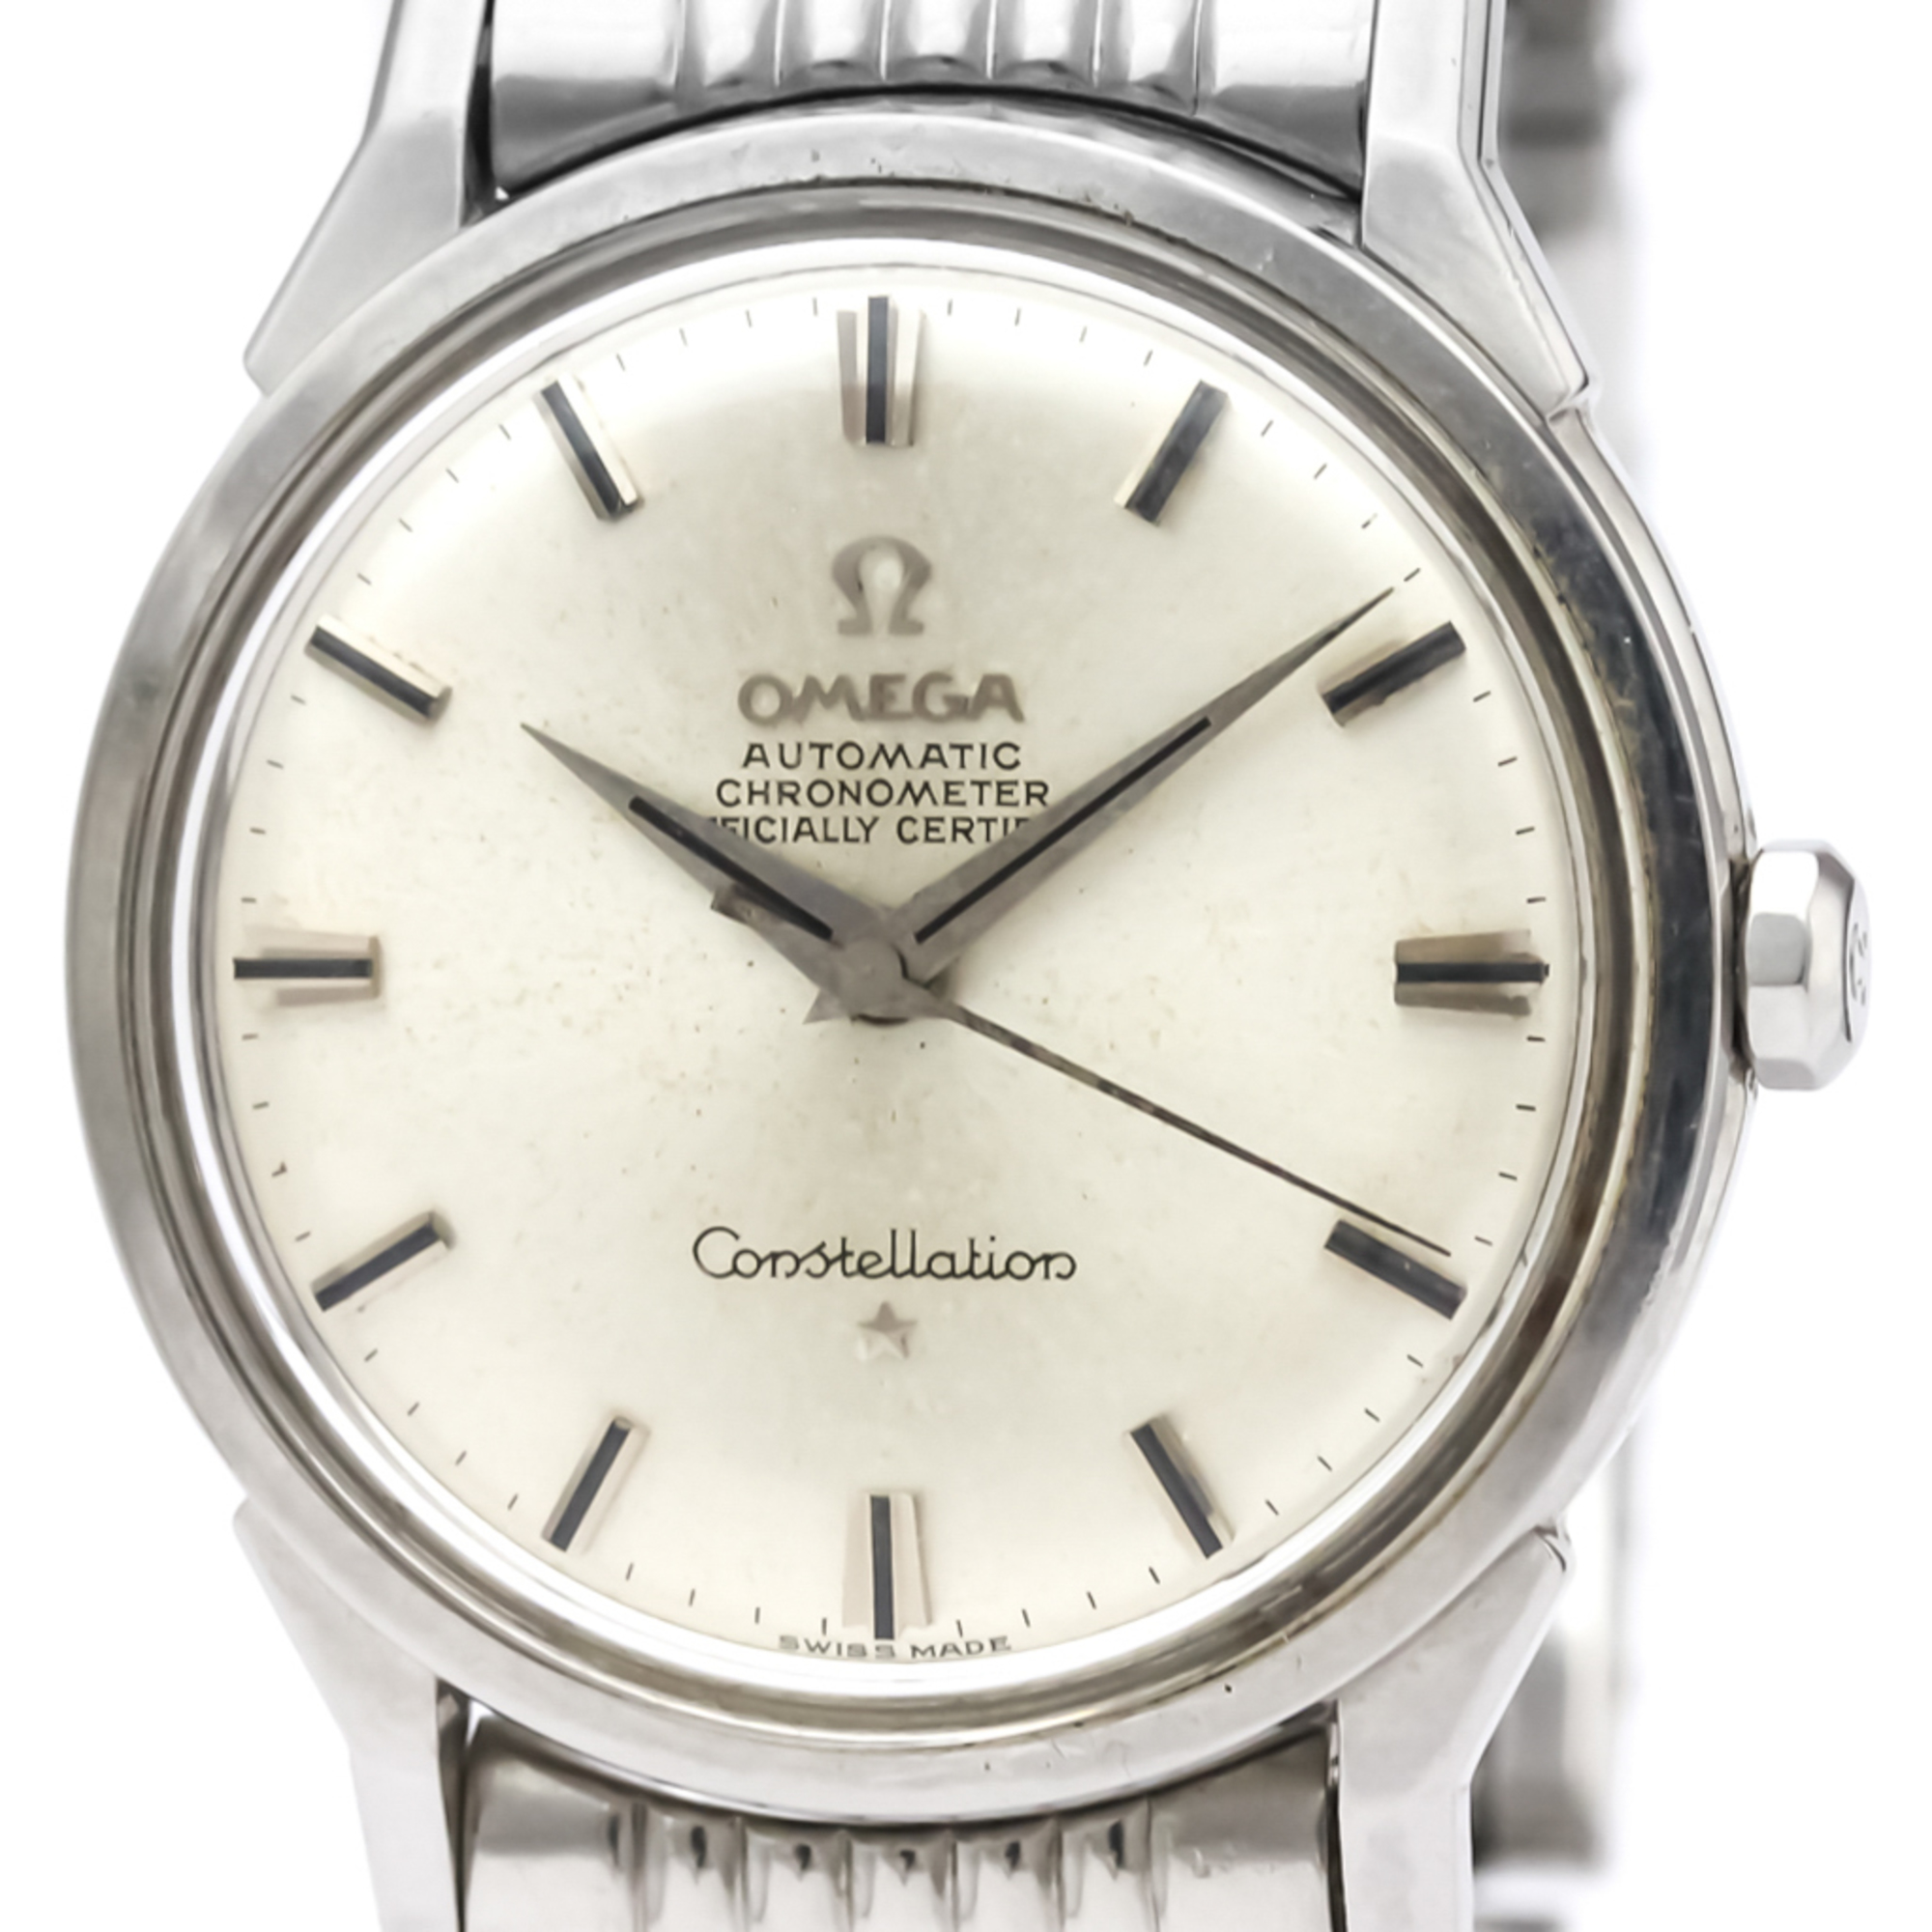 Omega Constellation Automatic Stainless Steel Men's Dress Watch 167.005